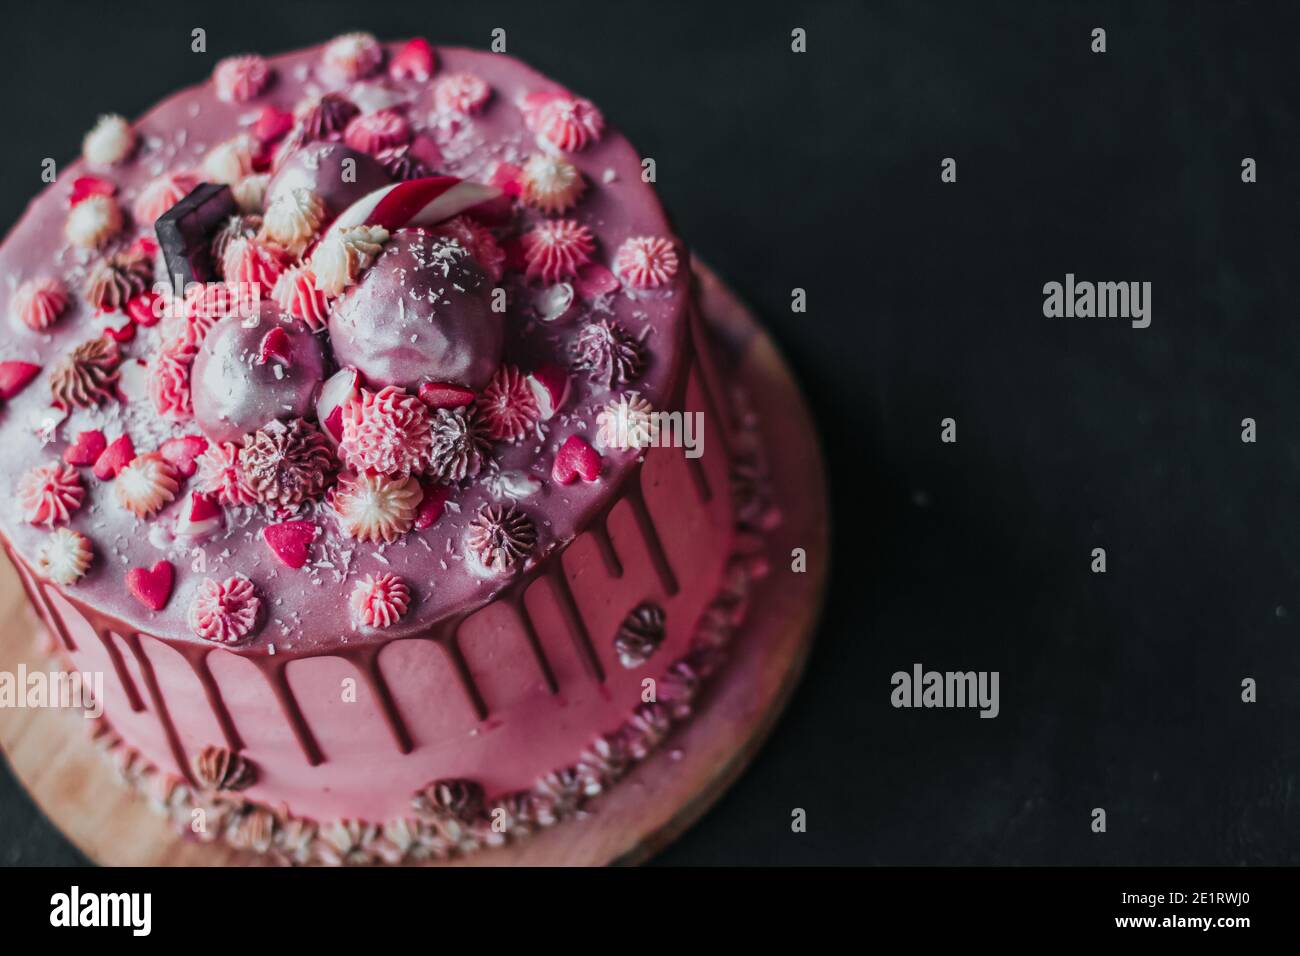 Birthday cake with pink cream and chocolate icing, sprinkled with hearts and sweets. Homemade cake copy space Stock Photo